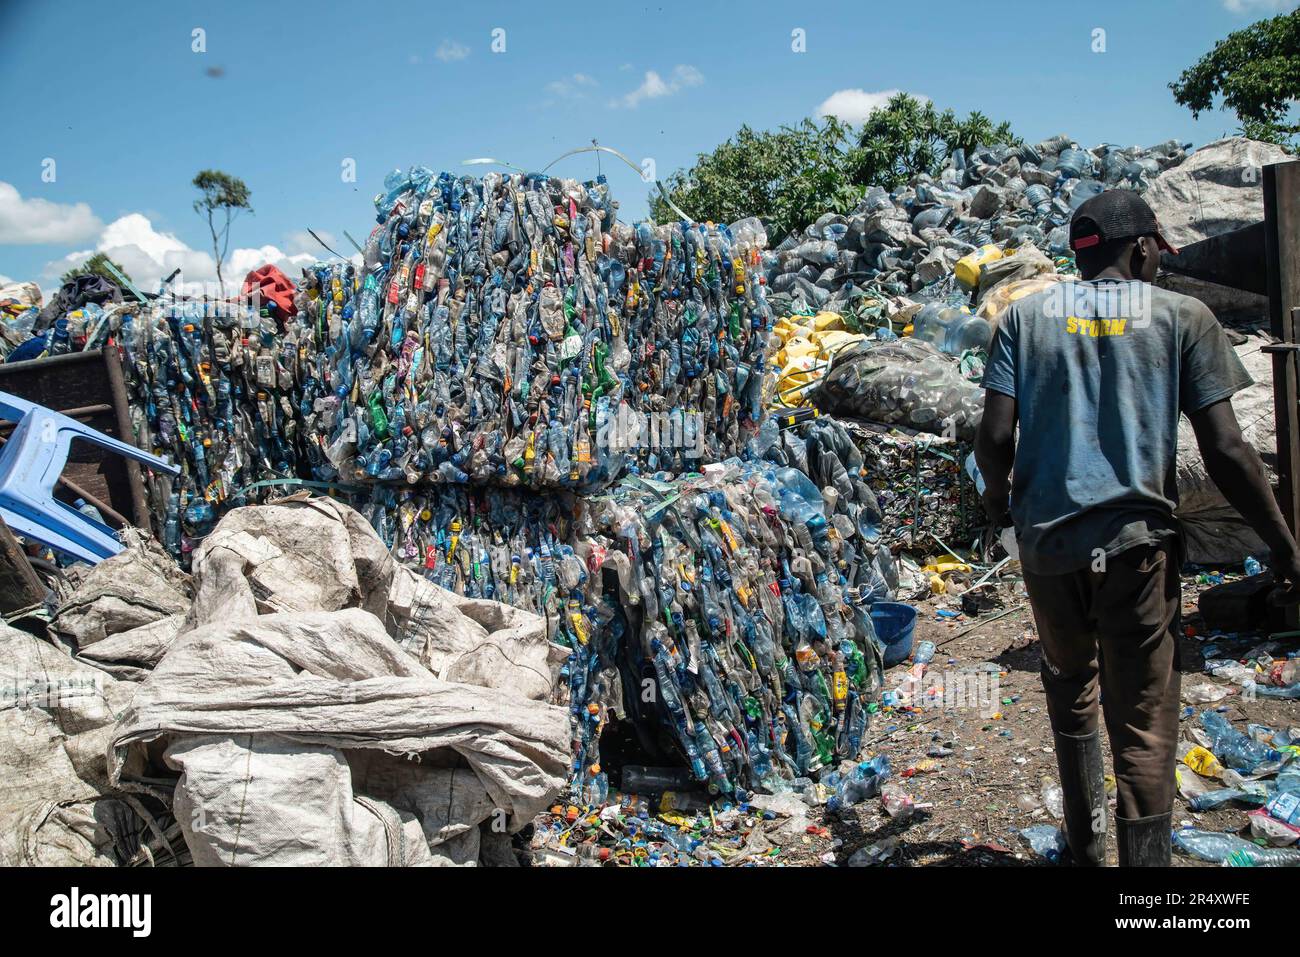 A worker is seen at a plastic recycling plant in Nakuru. Negotiators have gathered in Paris, France for the second round of deliberations to develop a global treaty aimed at tackling the escalating issue of plastic pollution. According to a recent report by the United Nations Environment Programme (UNEP), countries have the potential to reduce plastic pollution by 80% by 2040 by eliminating unnecessary plastics, implementing recycling and reuse strategies, introducing deposit return schemes, and substituting plastic with sustainable alternative materials. Stock Photo